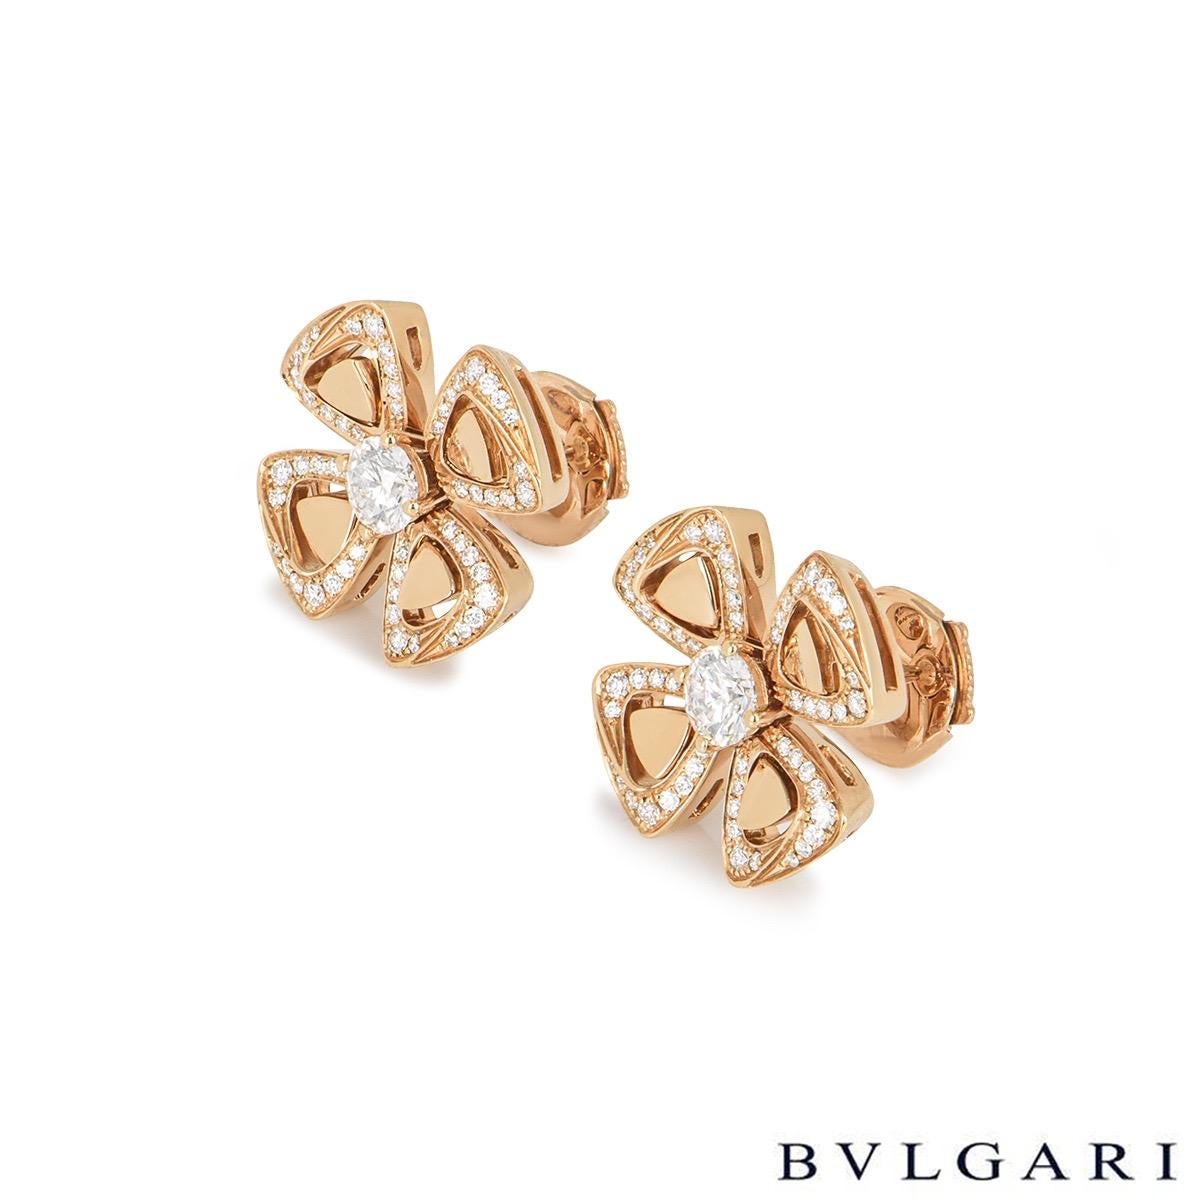 A pair of 18k rose gold Bvlgari earrings from the Fiorever collection. Each earring features a single round brilliant cut diamond surrounded by four openwork flower petals set with pave diamonds. The diamonds have a total weight of approximately